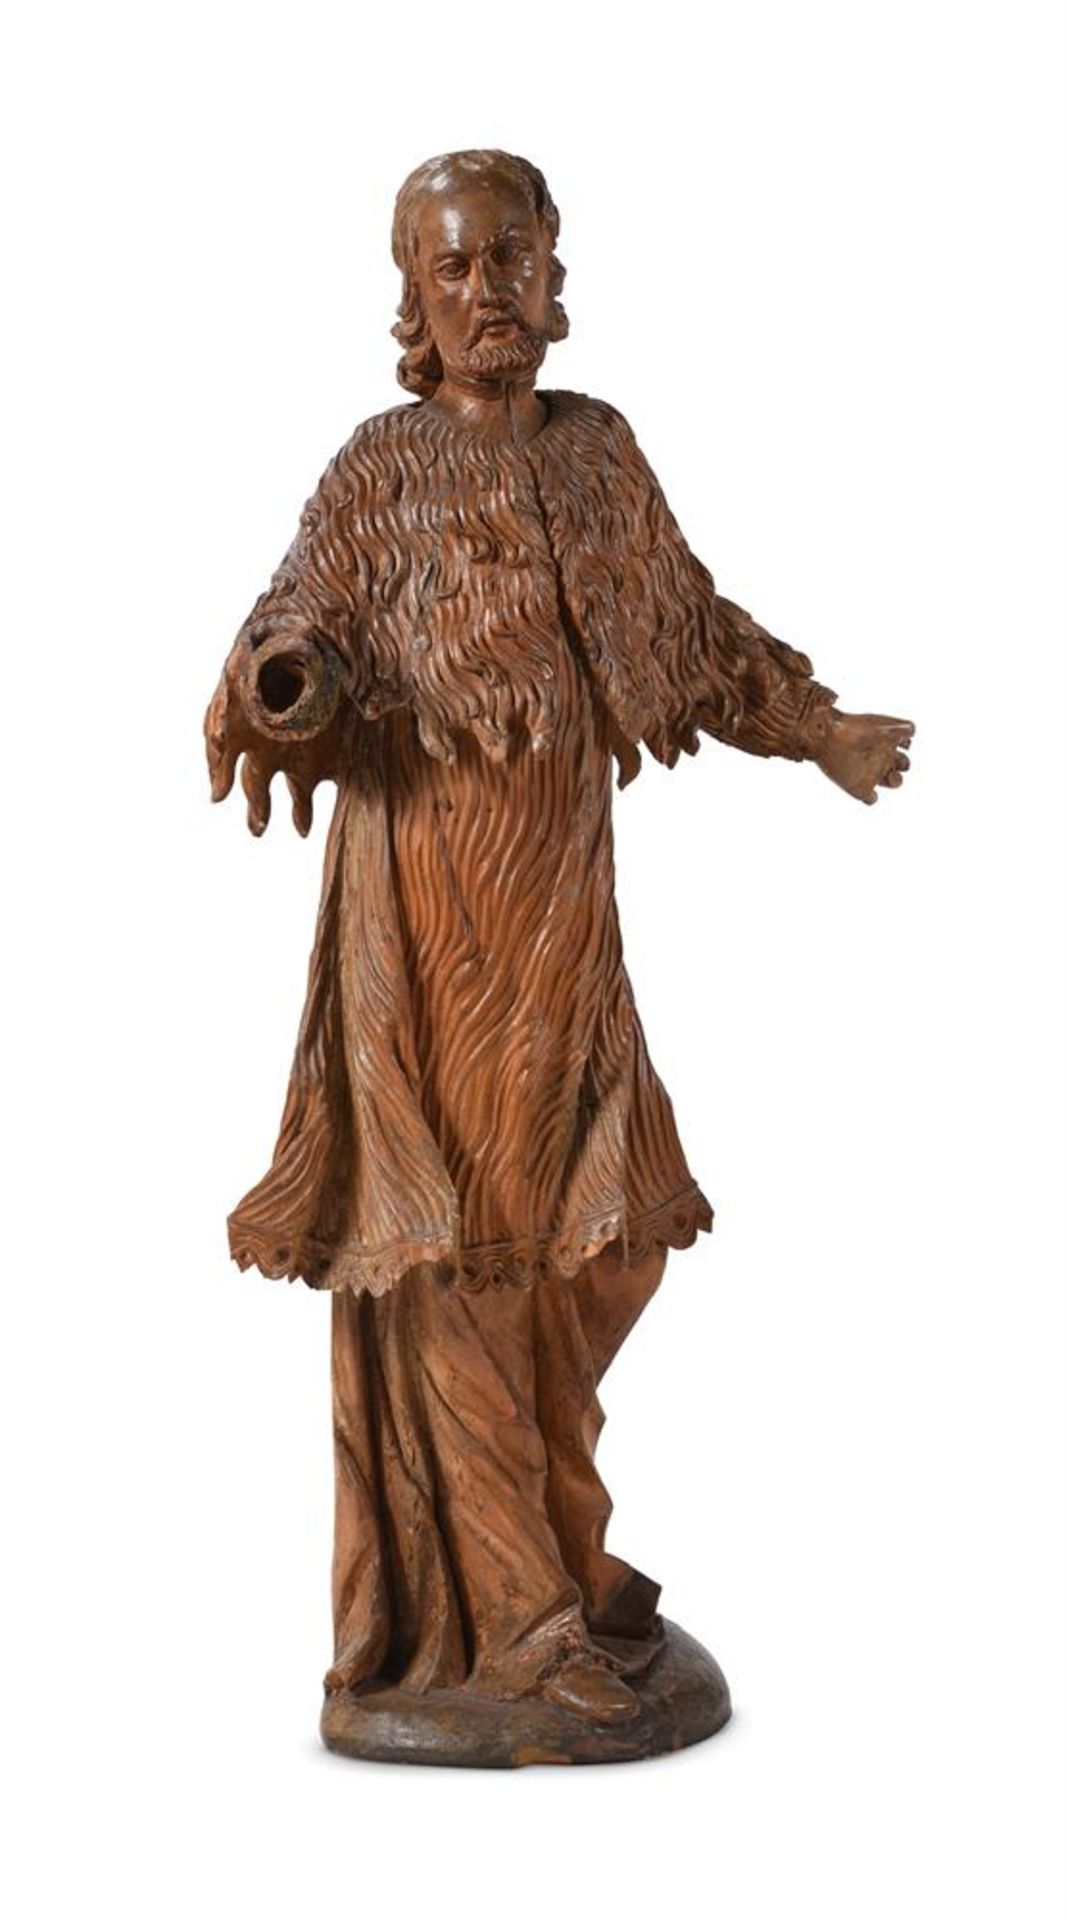 A CARVED LIMEWOOD FIGURE OF A STANDING APOSTOLIC FIGURE SWISS OR SOUTH GERMAN, 17TH CENTURY - Image 2 of 3